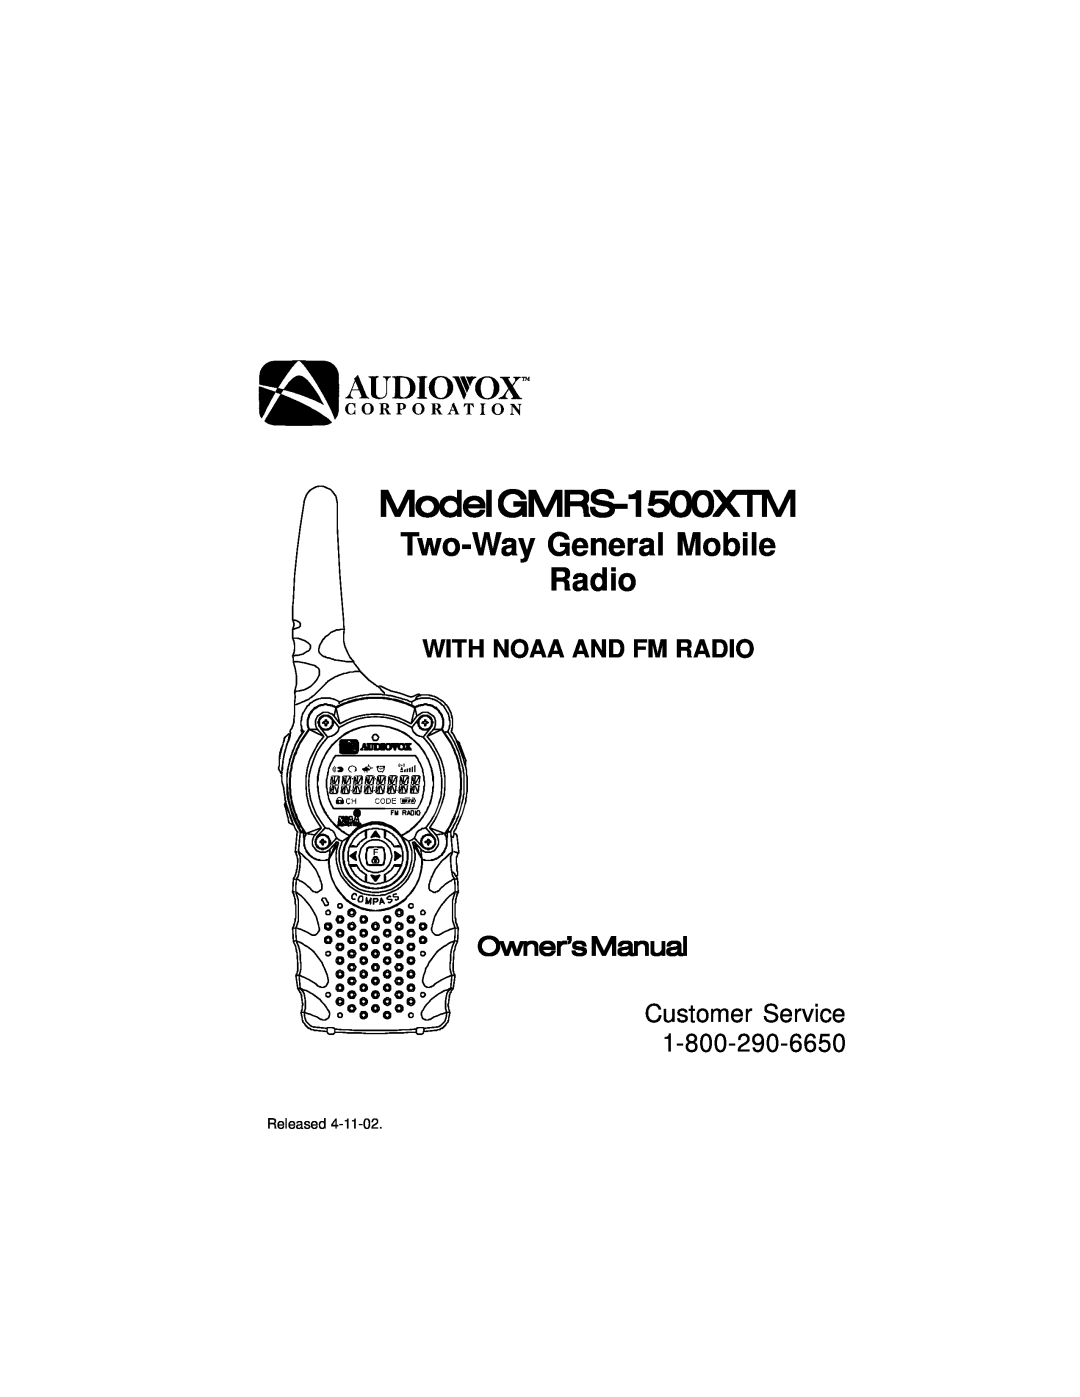 Audiovox manual With Noaa And Fm Radio, ModelGMRS-1500XTM, Two-Way General Mobile Radio, Owner’sManual 